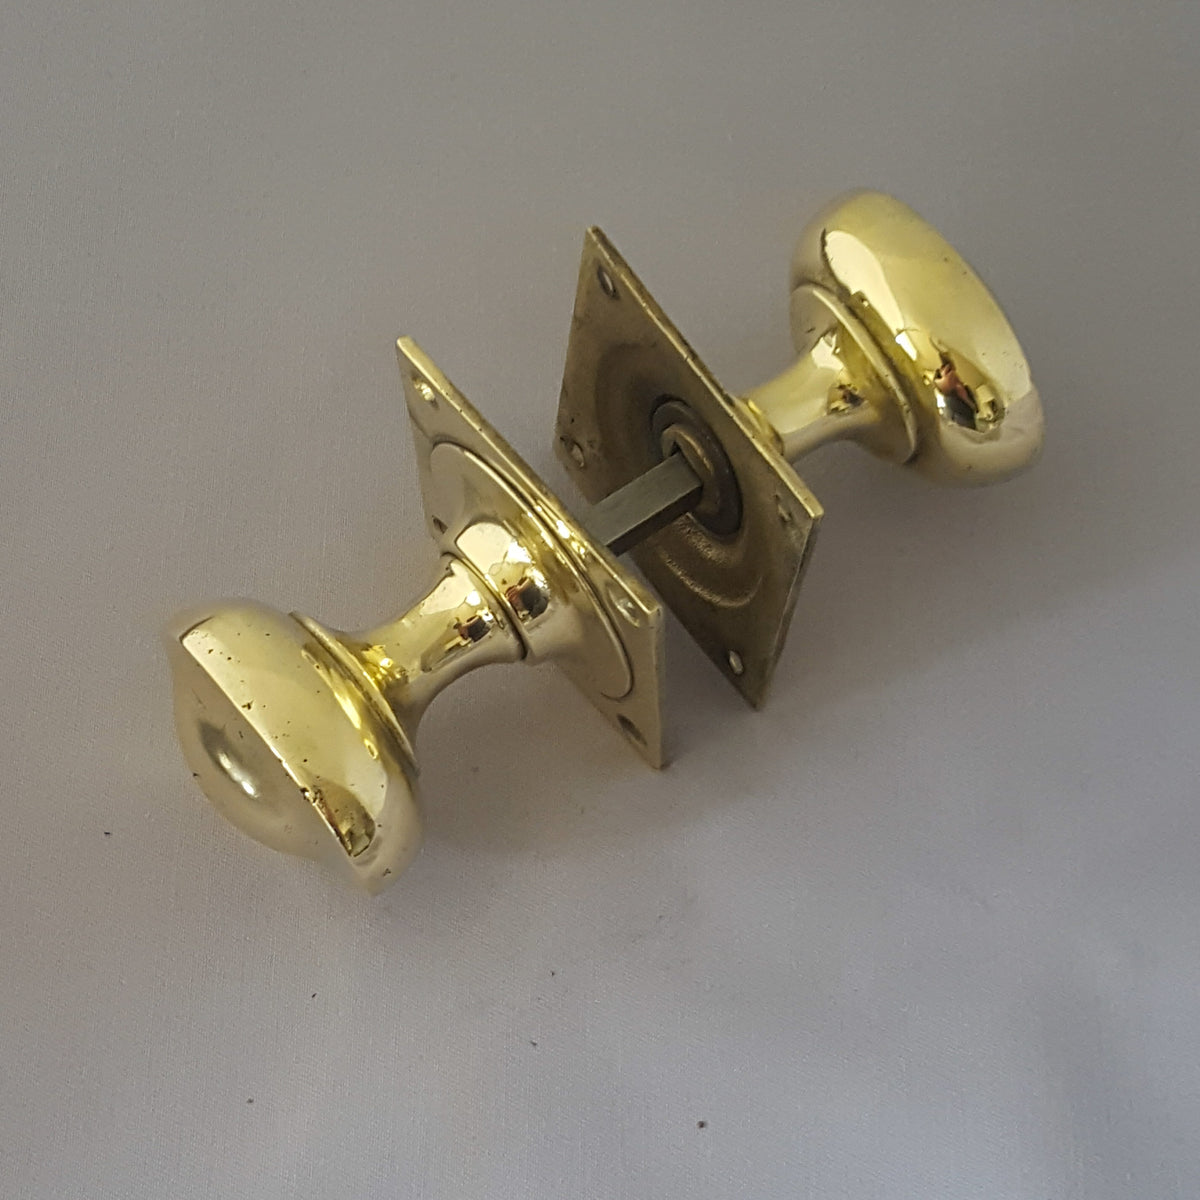 Edwardian Oval Doorknobs - Mortice Knobs - The Ceramic Store